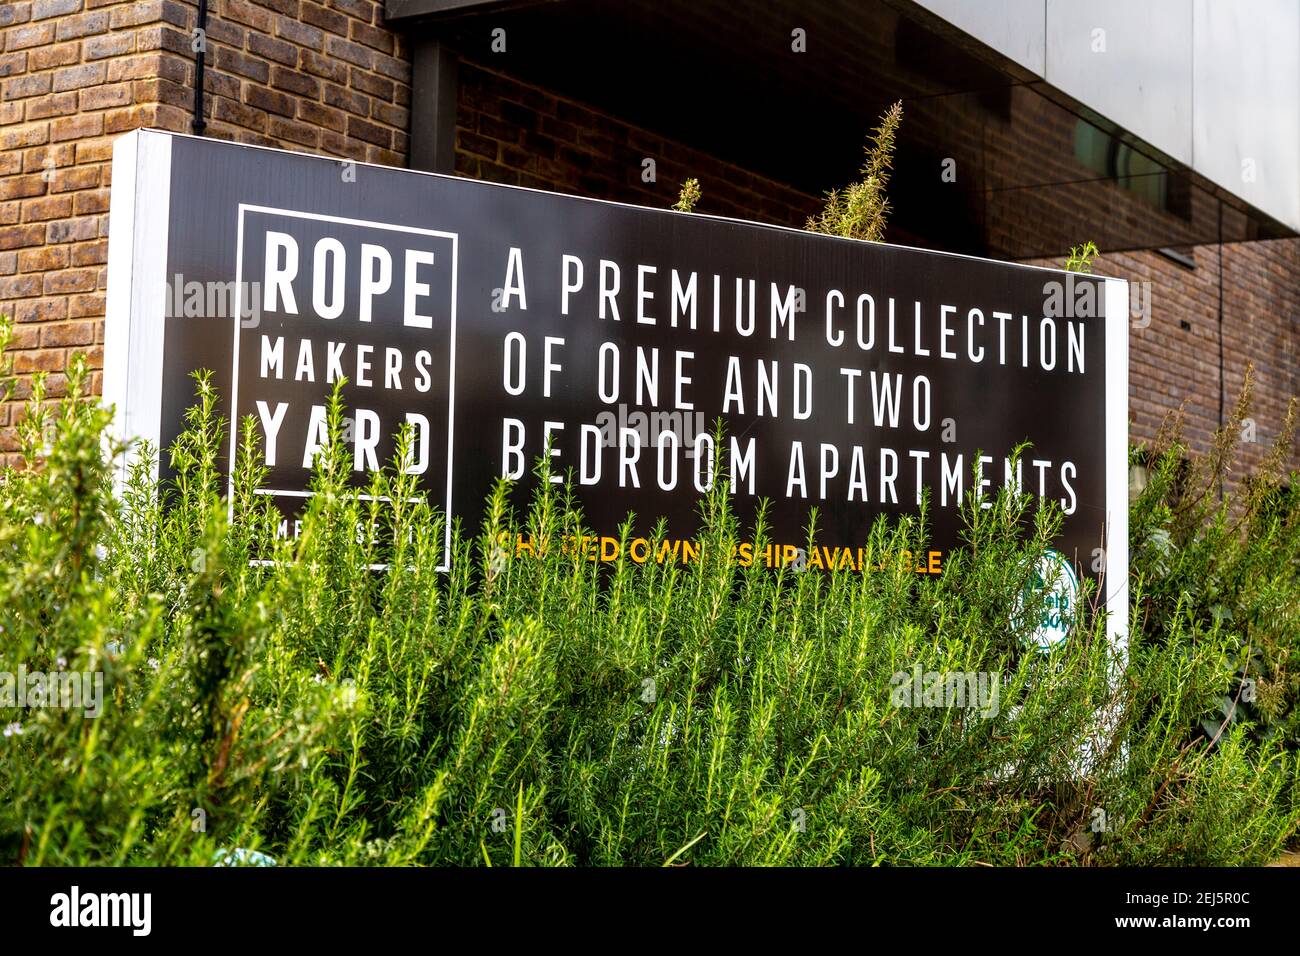 Sign in front of new, residential block Ropemakers Yard with properies available under the Shared Ownership scheme in Limehouse, London, UK Stock Photo